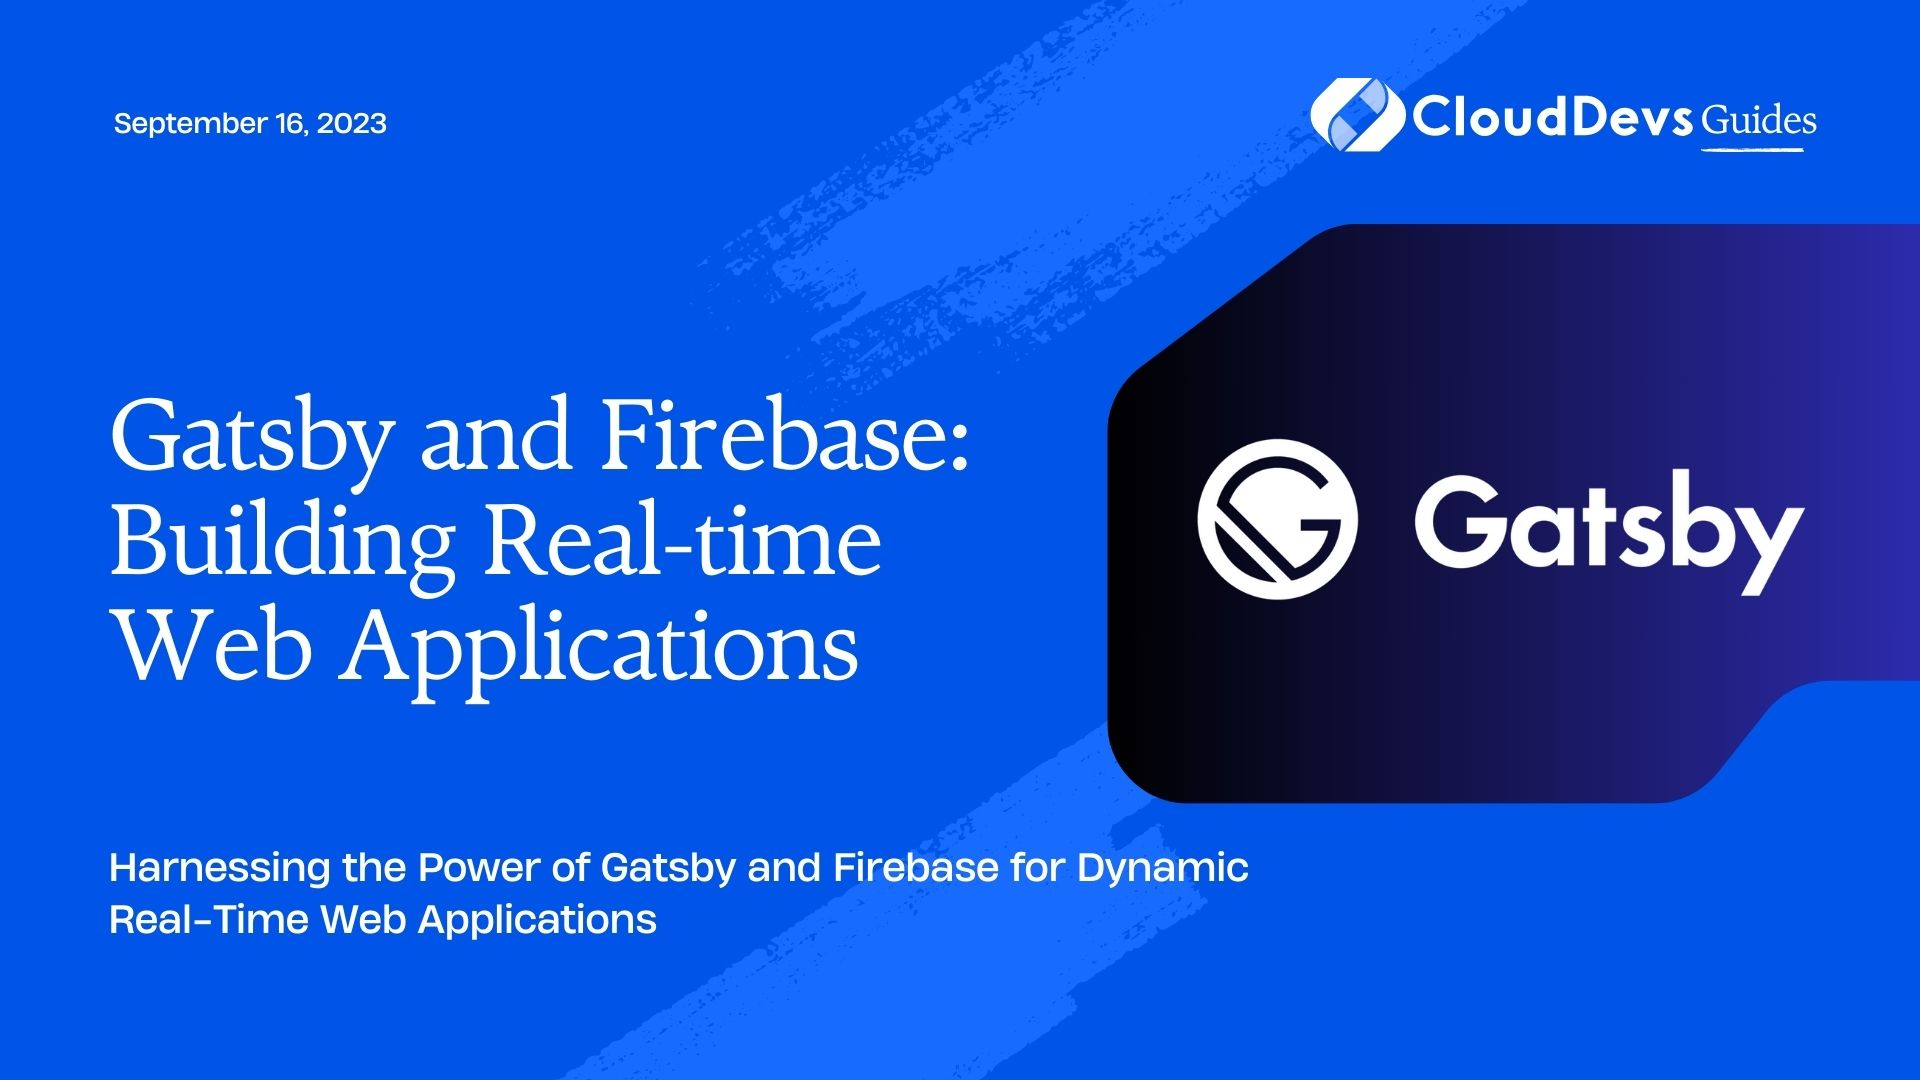 Gatsby and Firebase: Building Real-time Web Applications